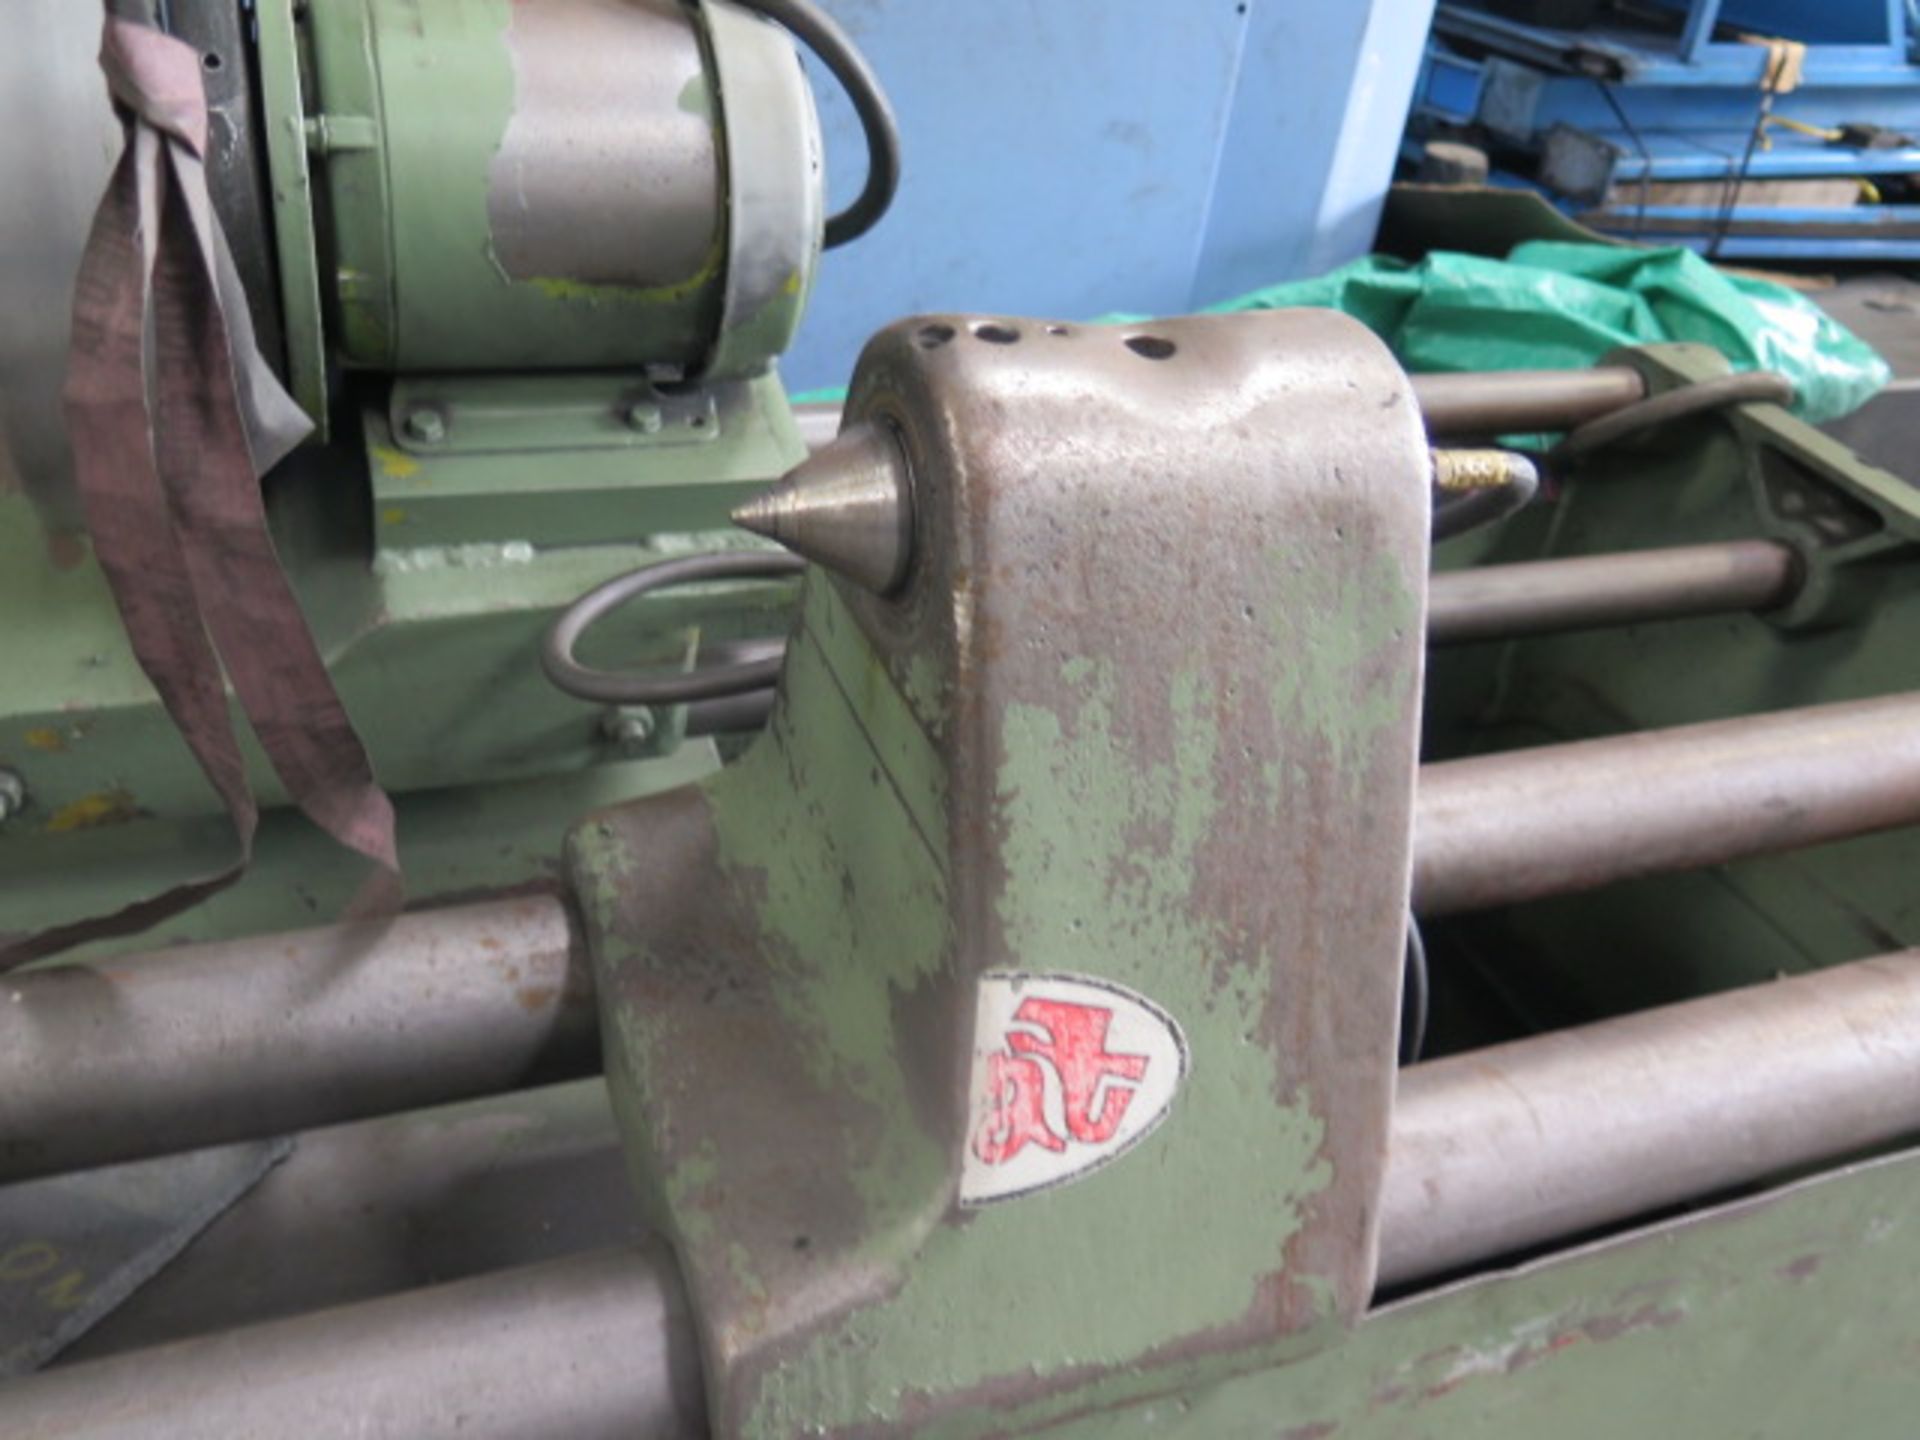 Storm-Vulcan mdl. 135 Crank Shaft Finishing Machine s/n 50-187 (SOLD AS-IS - NO WARRANTY) - Image 8 of 11